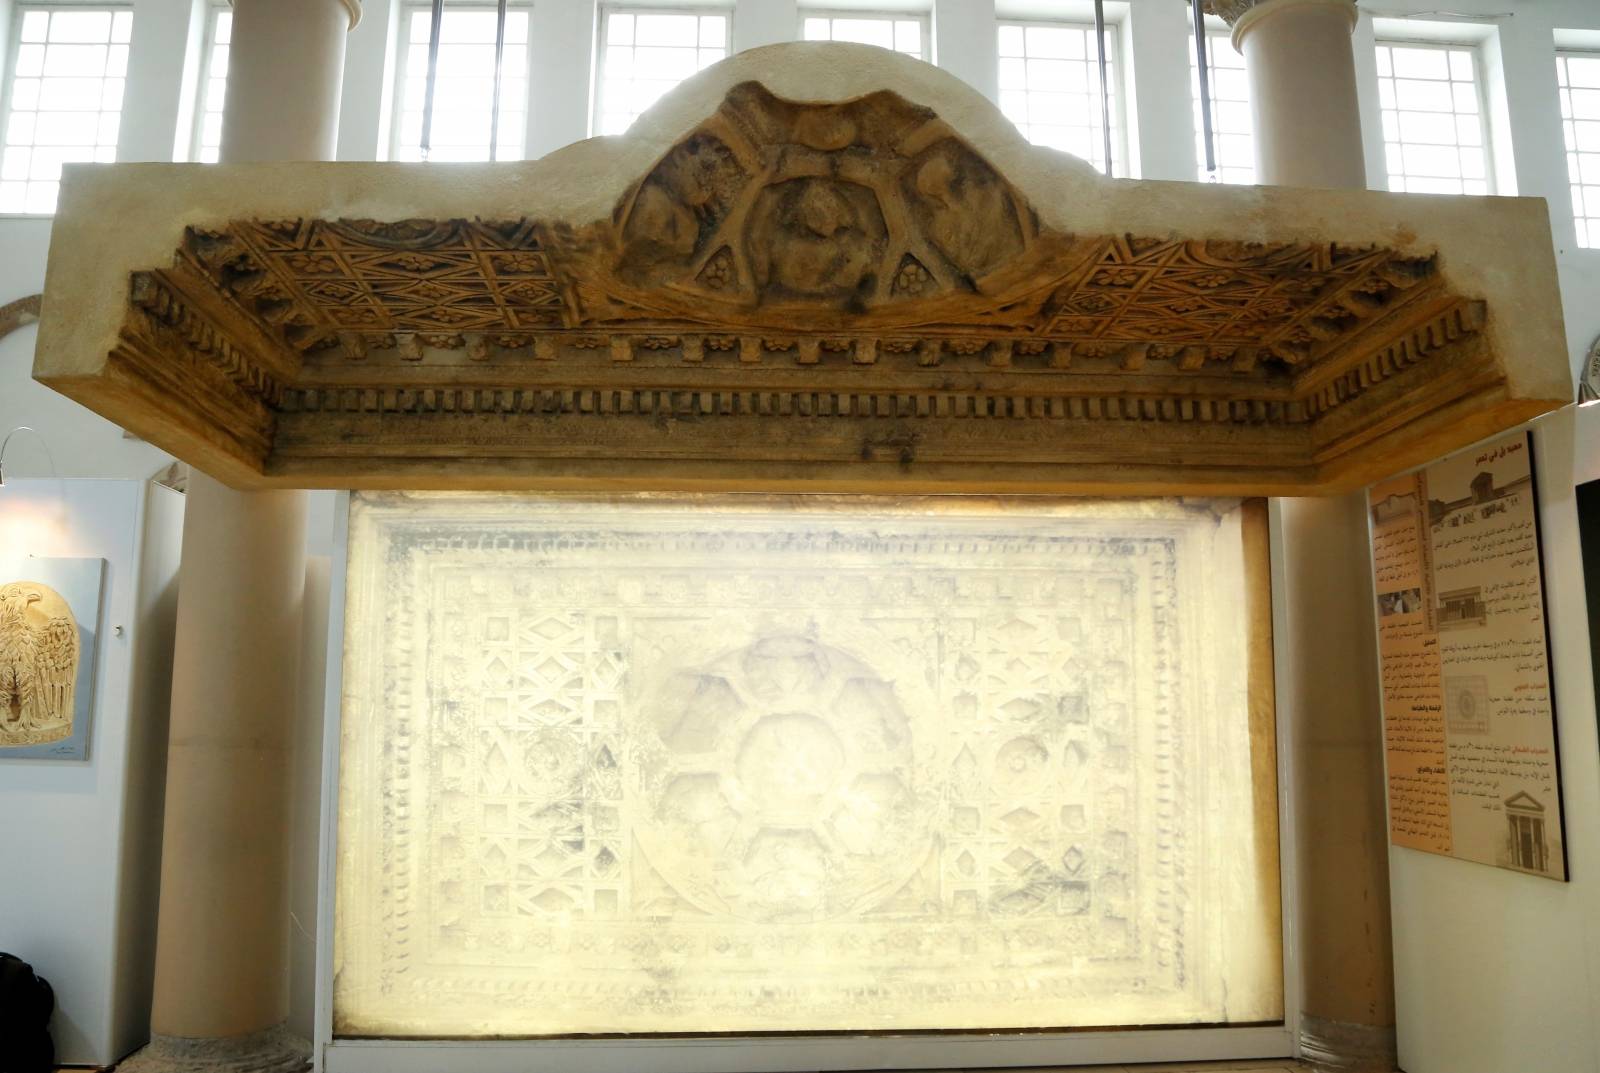 A replica of an altar ceiling from the old Temple of Bel is exhibited at Syria's National Museum of Damascus